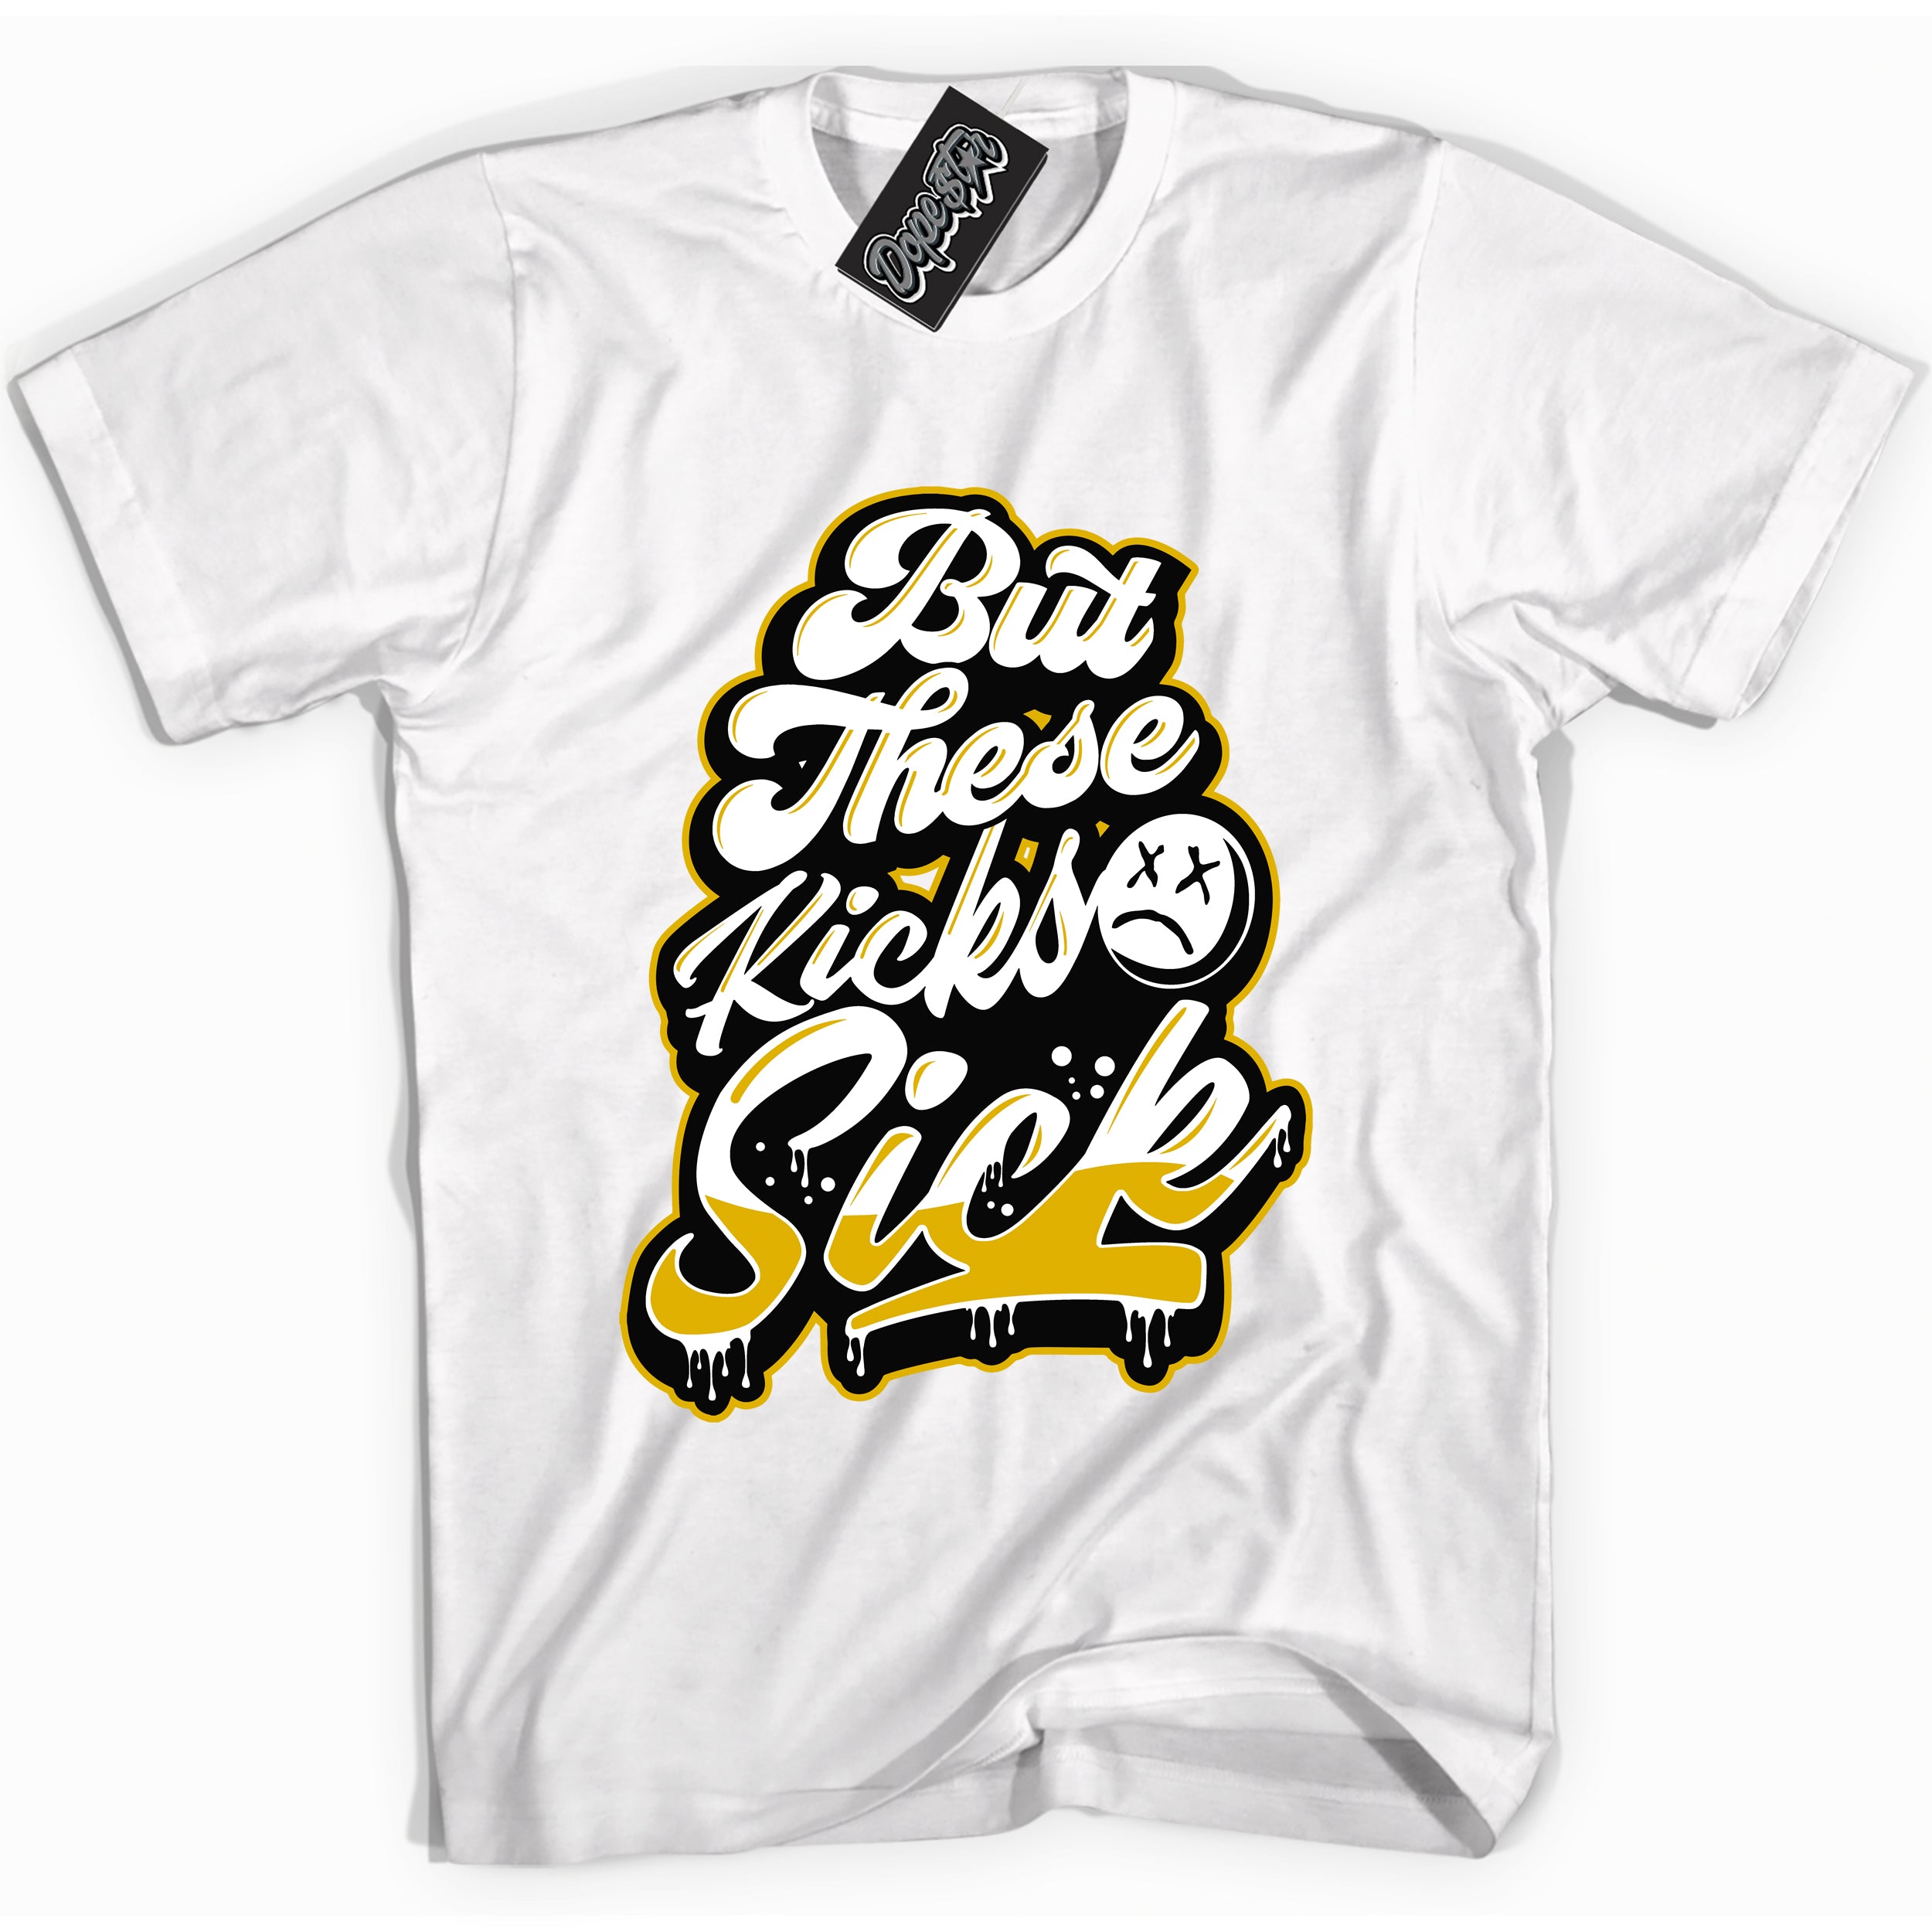 Cool White Shirt with “ Kick Sick” design that perfectly matches Yellow Ochre 6s Sneakers.